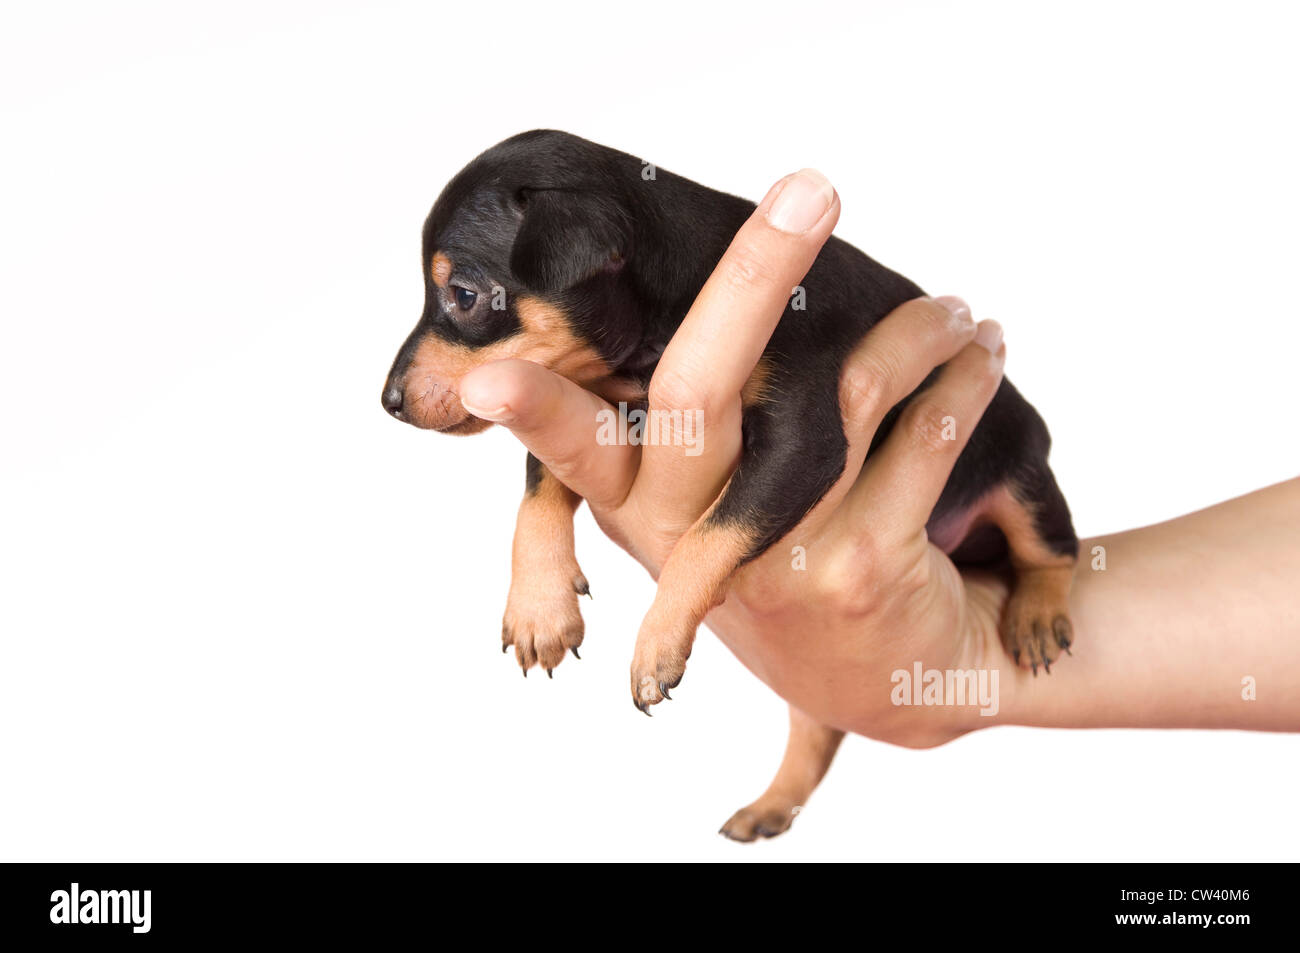 Prague Rattler. Puppy being in a hand. Studio picture against a white background Stock Photo